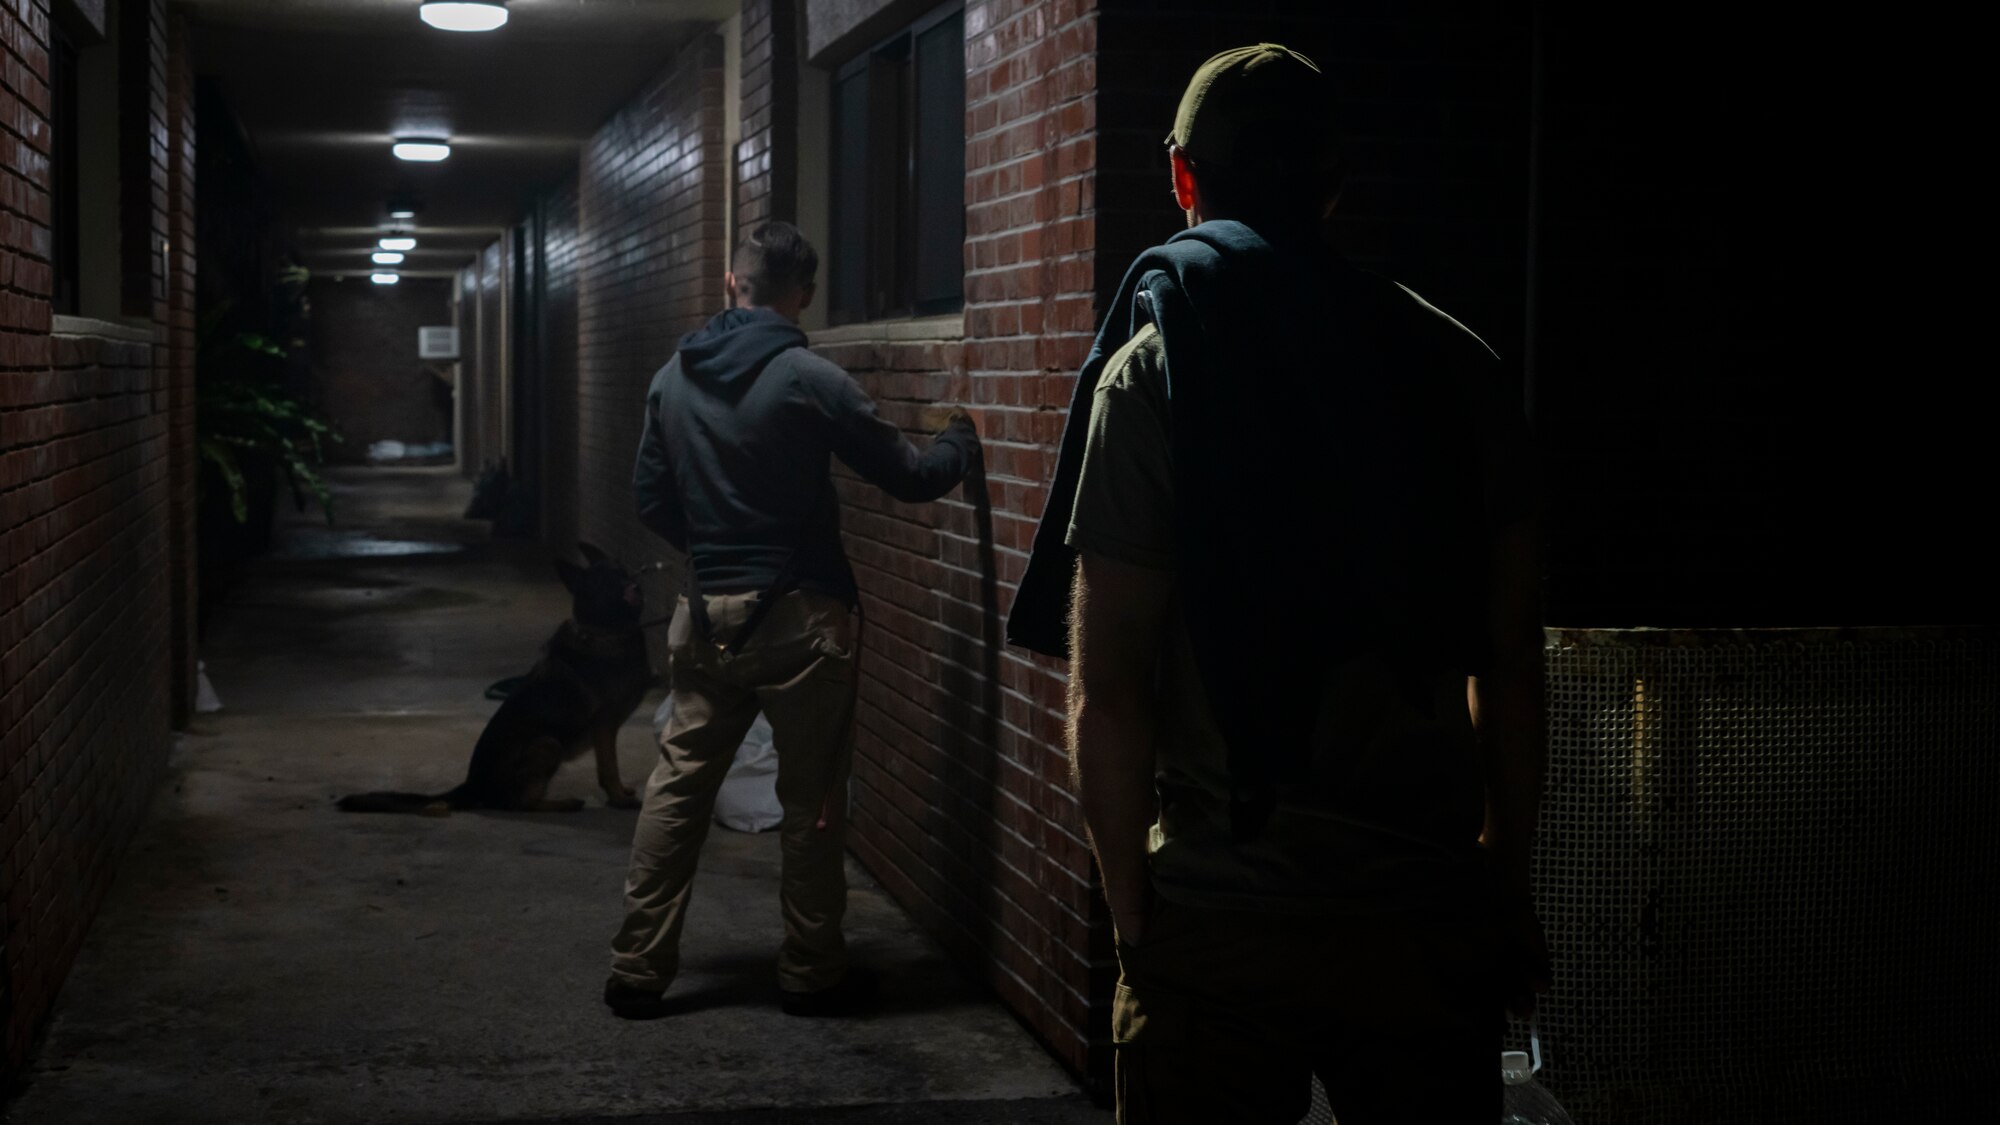 Military working dog and his trainer search for simulated explosives in a dark hallway as a MWD trainer watches.